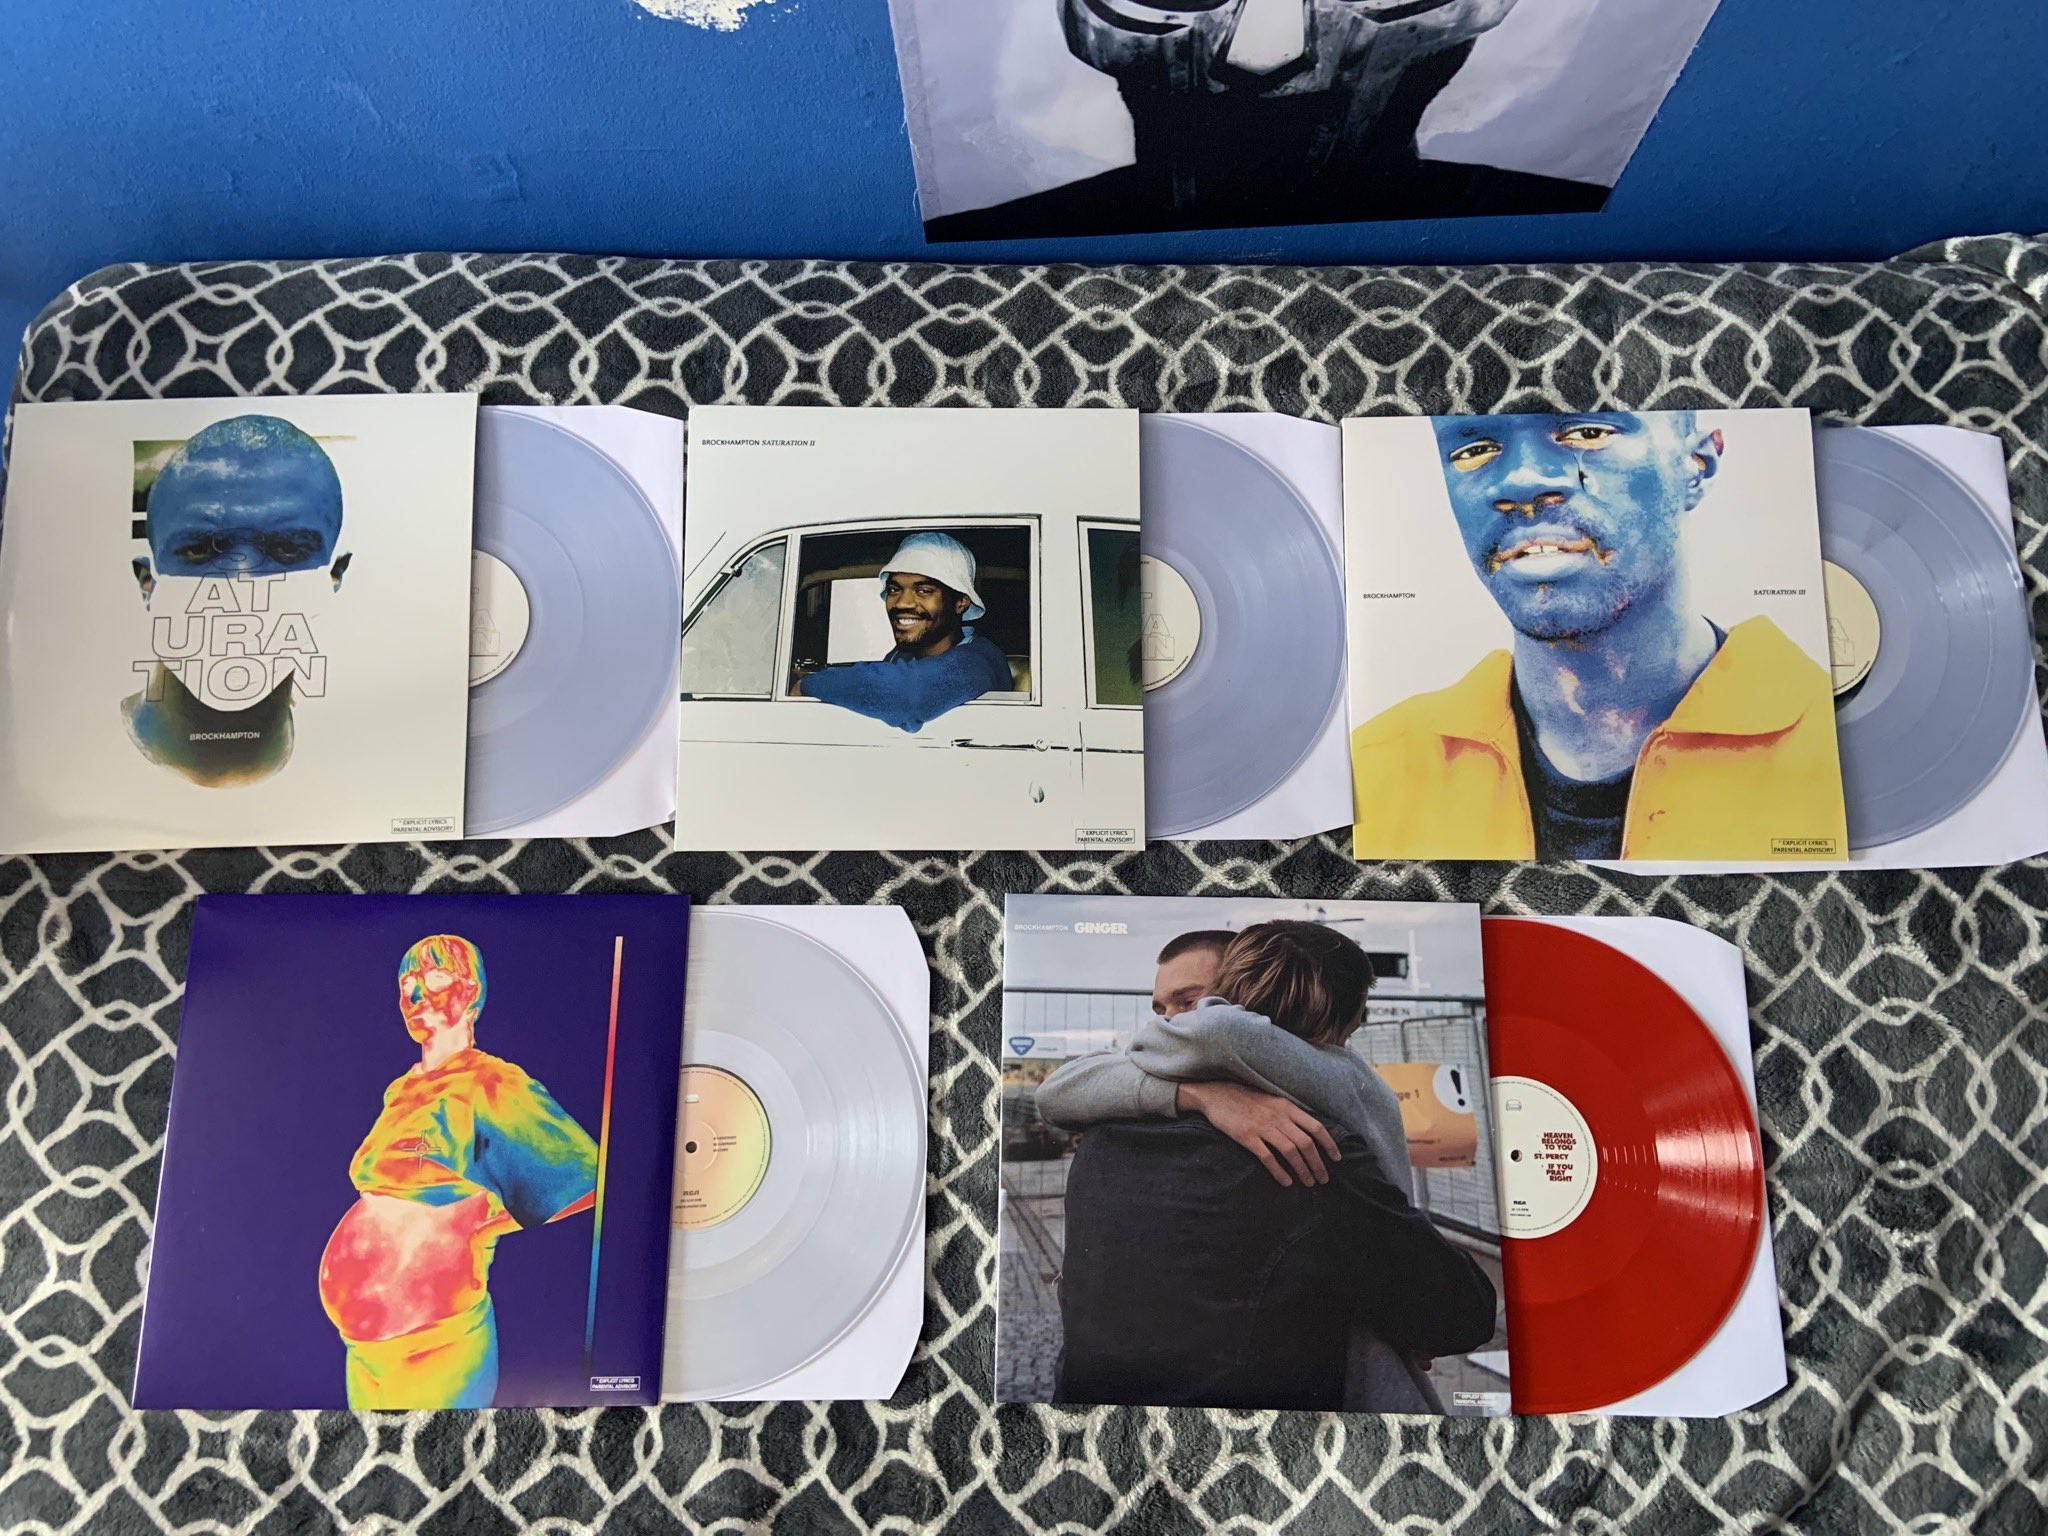 recede🥳BLOOM OUT NOW!🥀 on Twitter: "Next is my Brockhampton The Trilogy is all bootlegs but are on beautiful clear blue vinyl and sound great. Iridescence is on a vinyl.